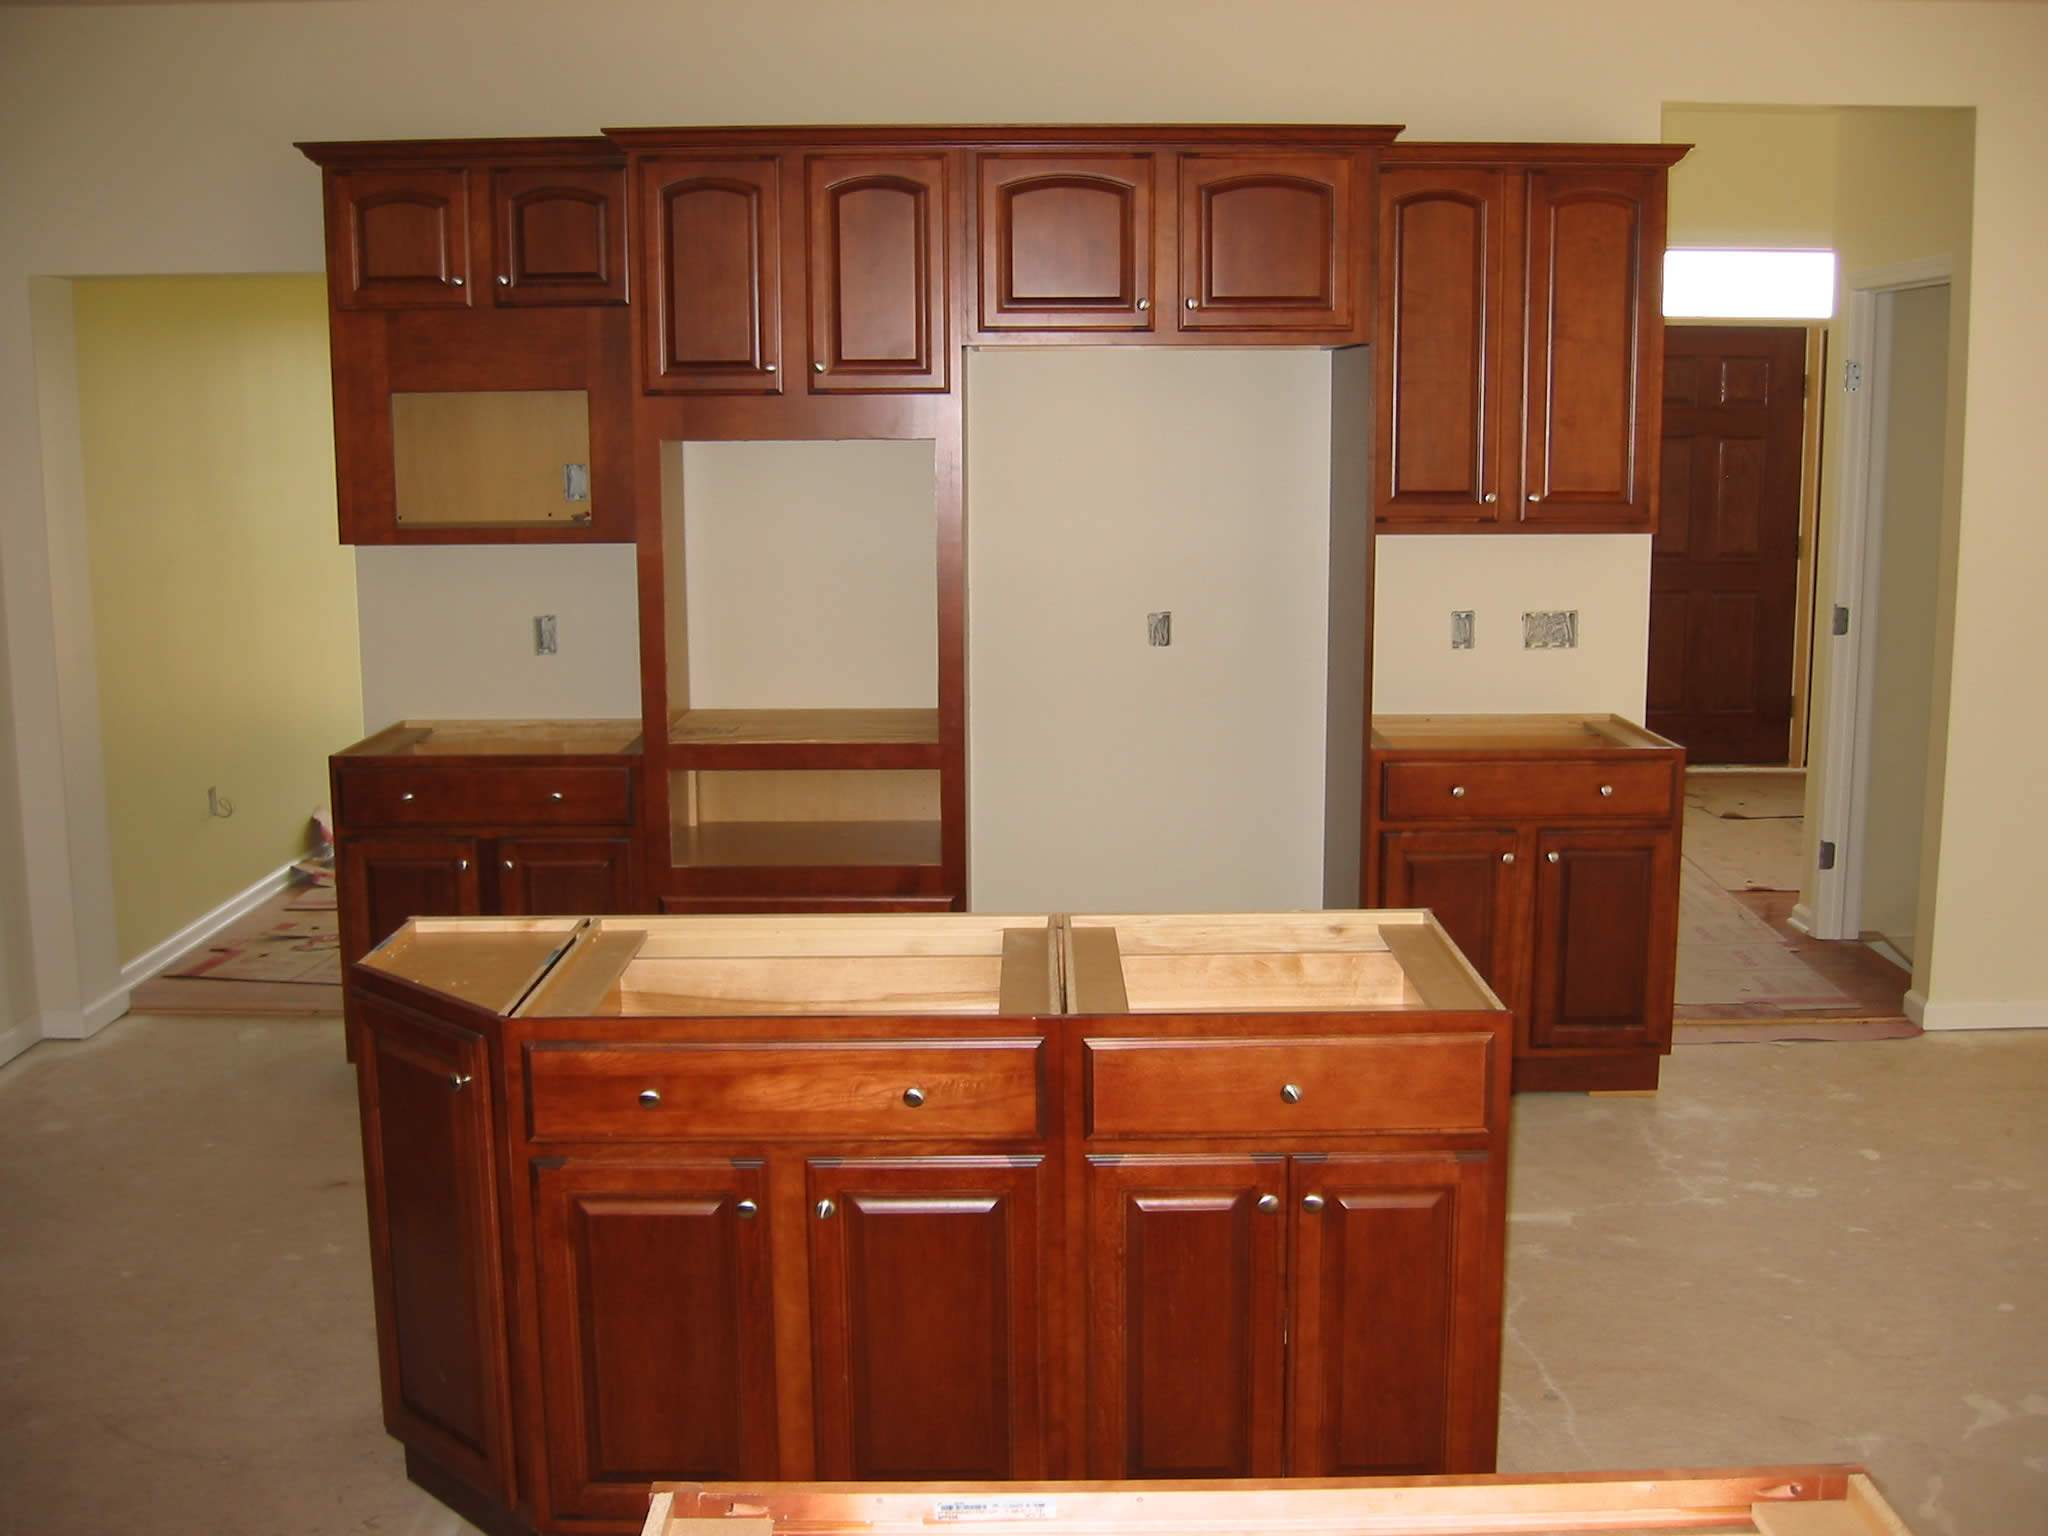 Our Kitchen Cabinets from the Sunroom